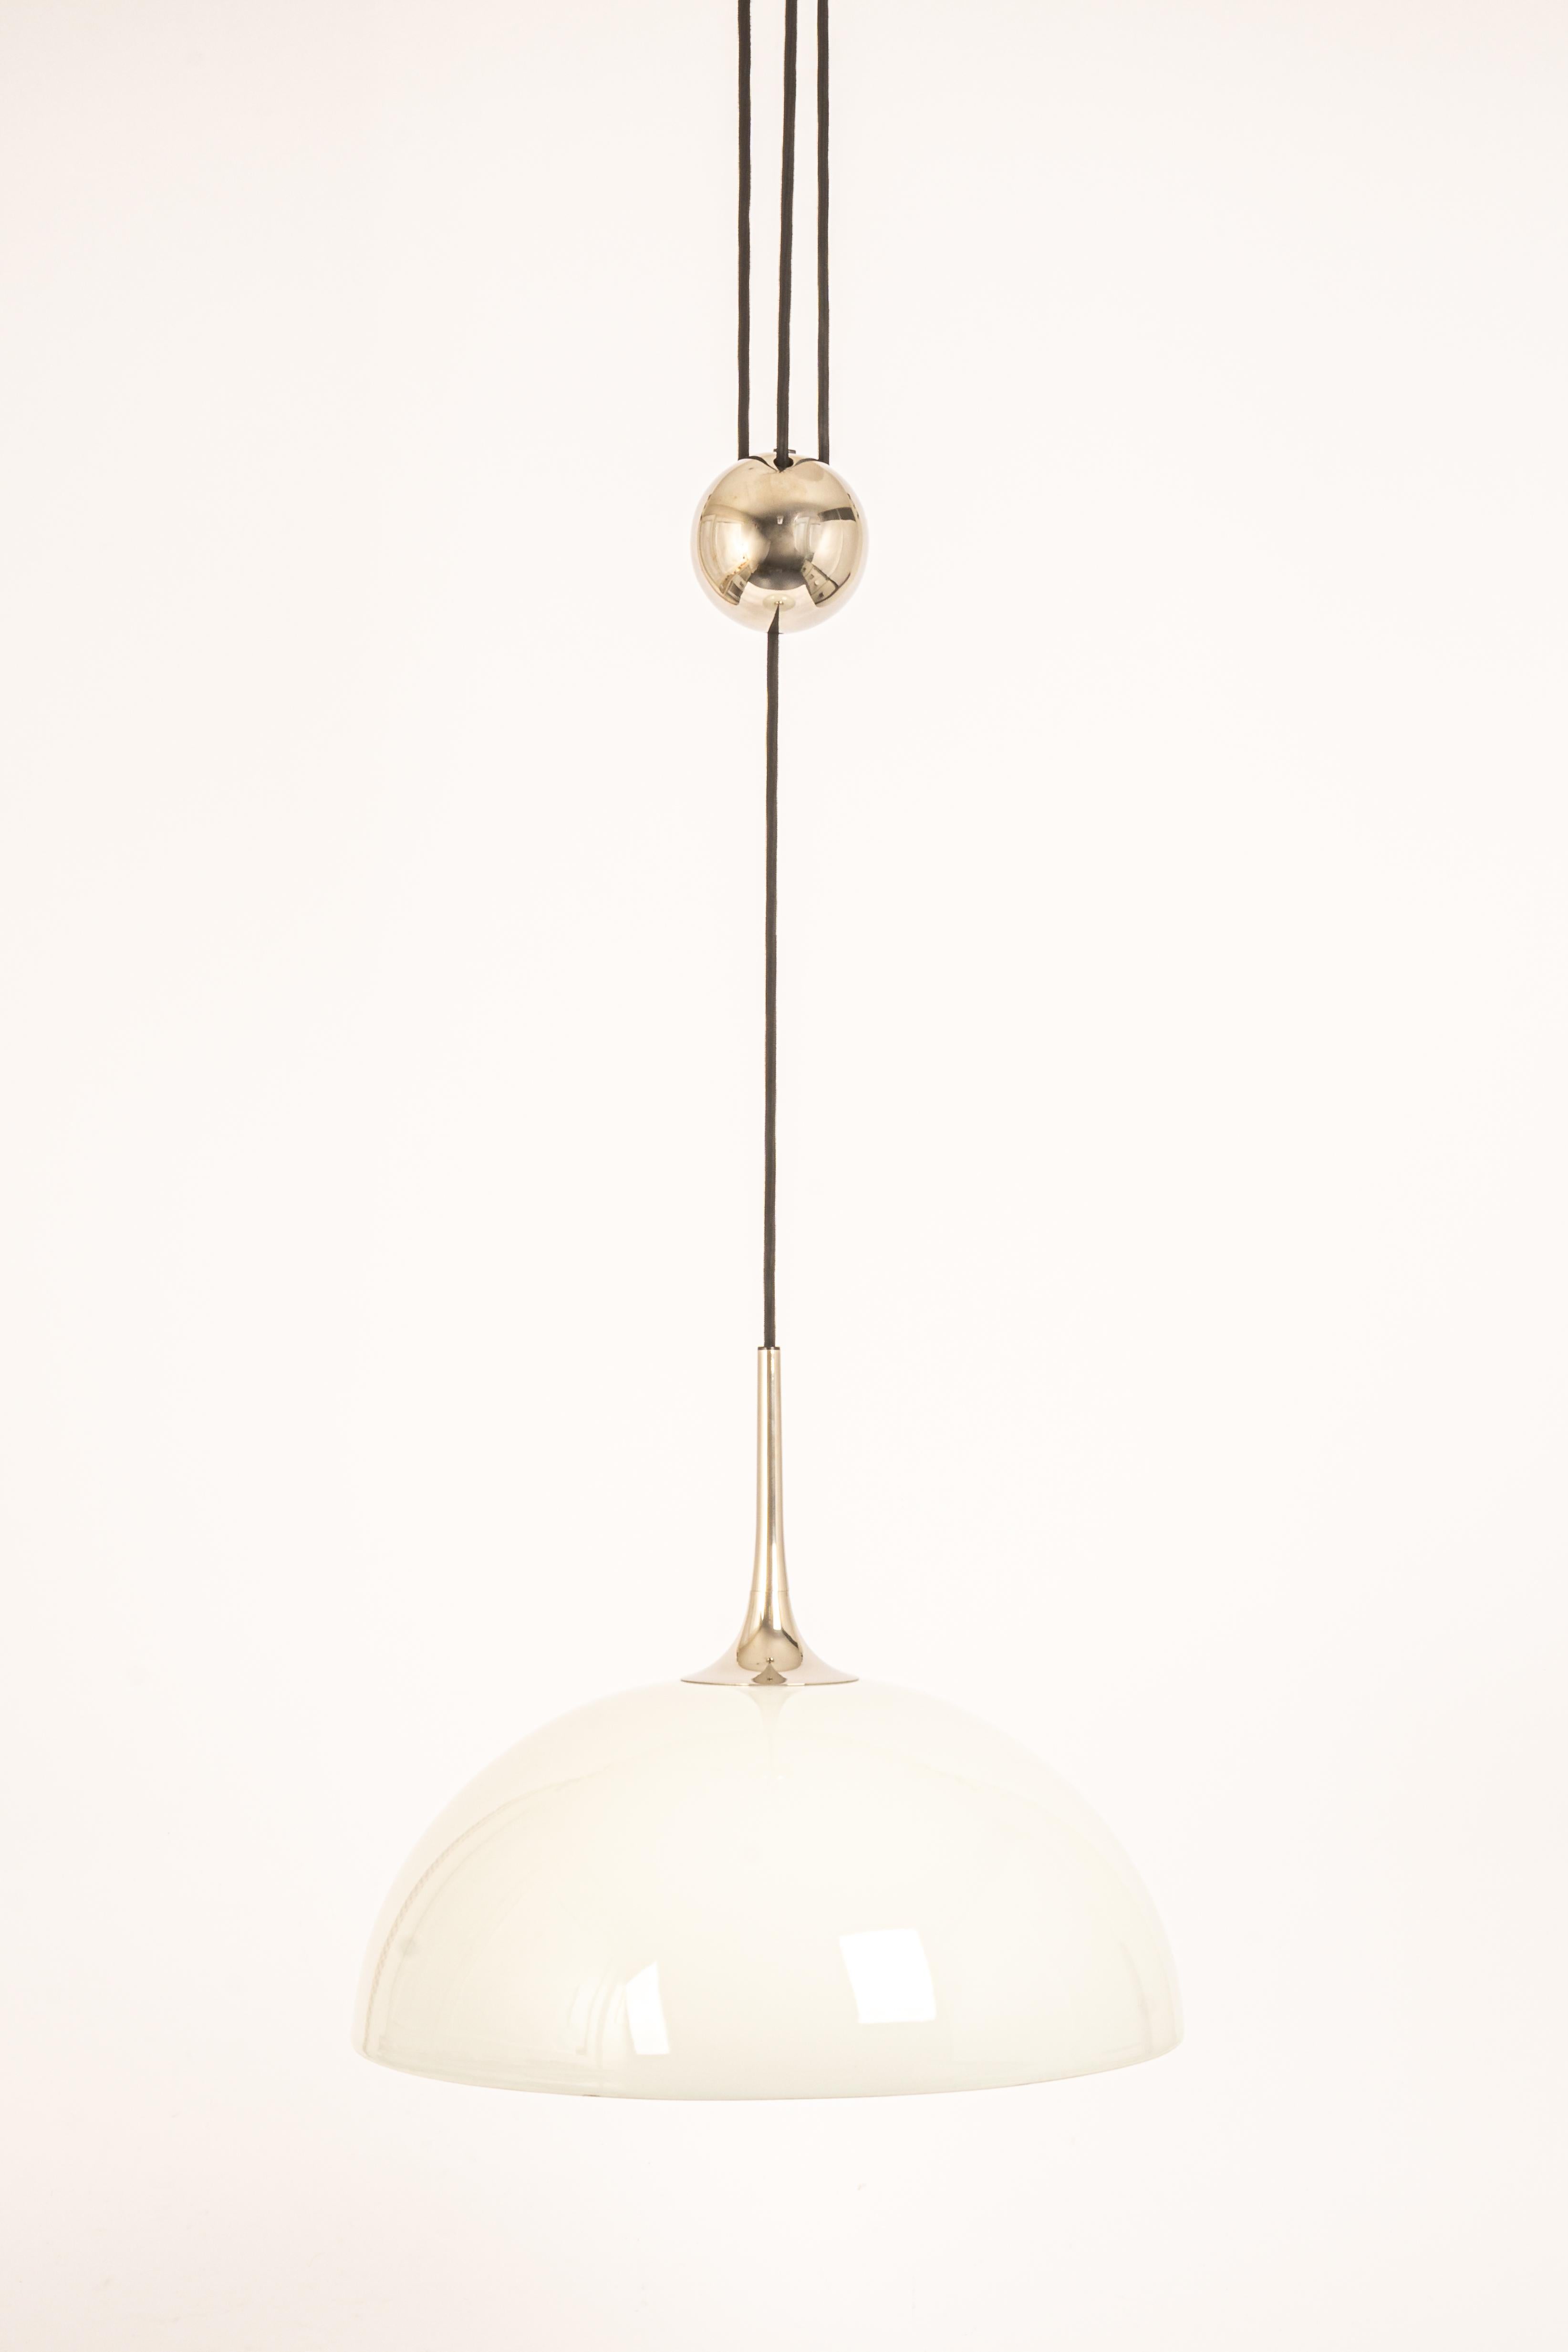 Late 20th Century Large Adjustable Chrome Counterweight Pendant Light by Florian Schulz, Germany